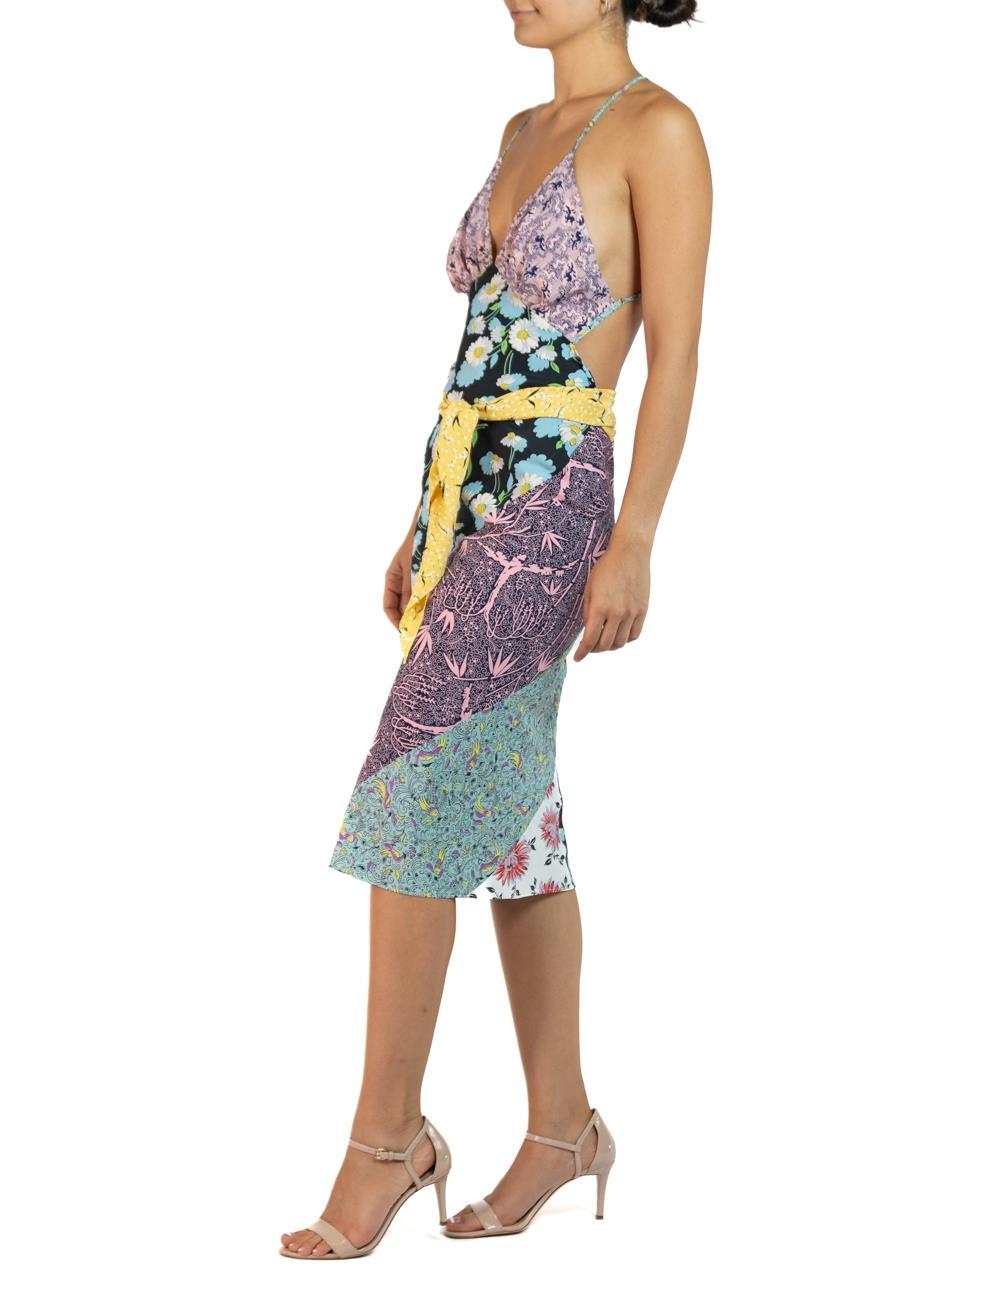 Made from Up-cycled vintage 1940s cold rayon. Each Morphew Collection Sagittarius is a unique patchwork of vintage fabrics. From florals to authentic Hawaiians and fun conversational prints each dress tells it's own story. Able to be worn a